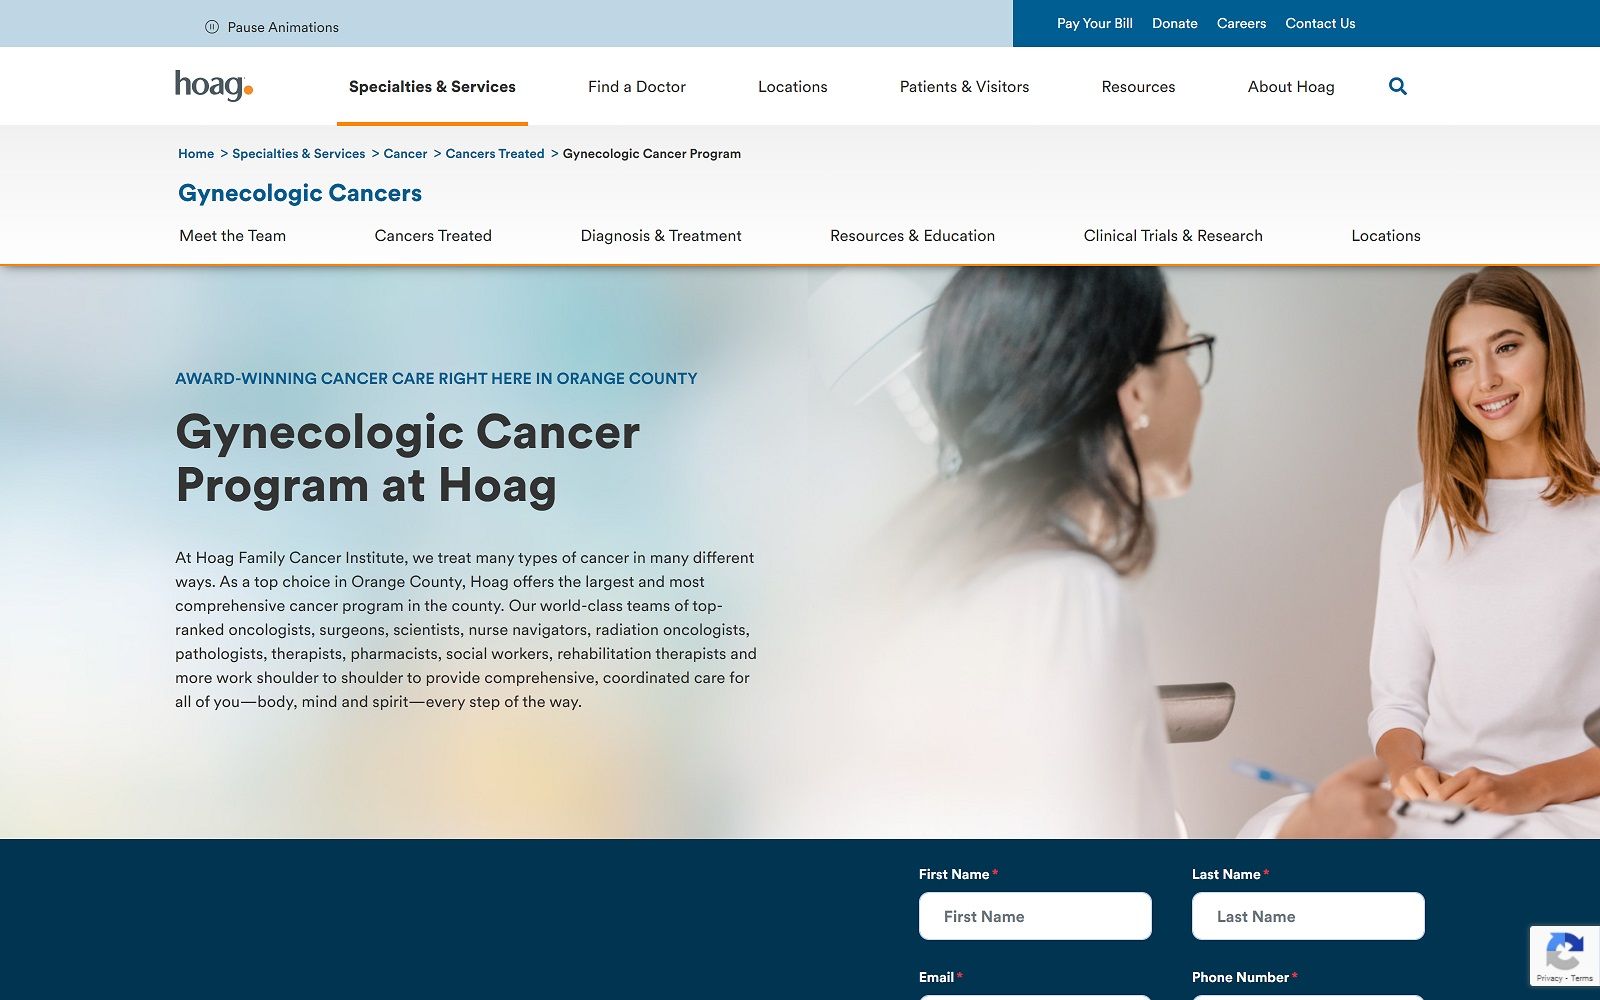 hoag.org_specialties-services_cancer_conditions_gynecologic-cancers